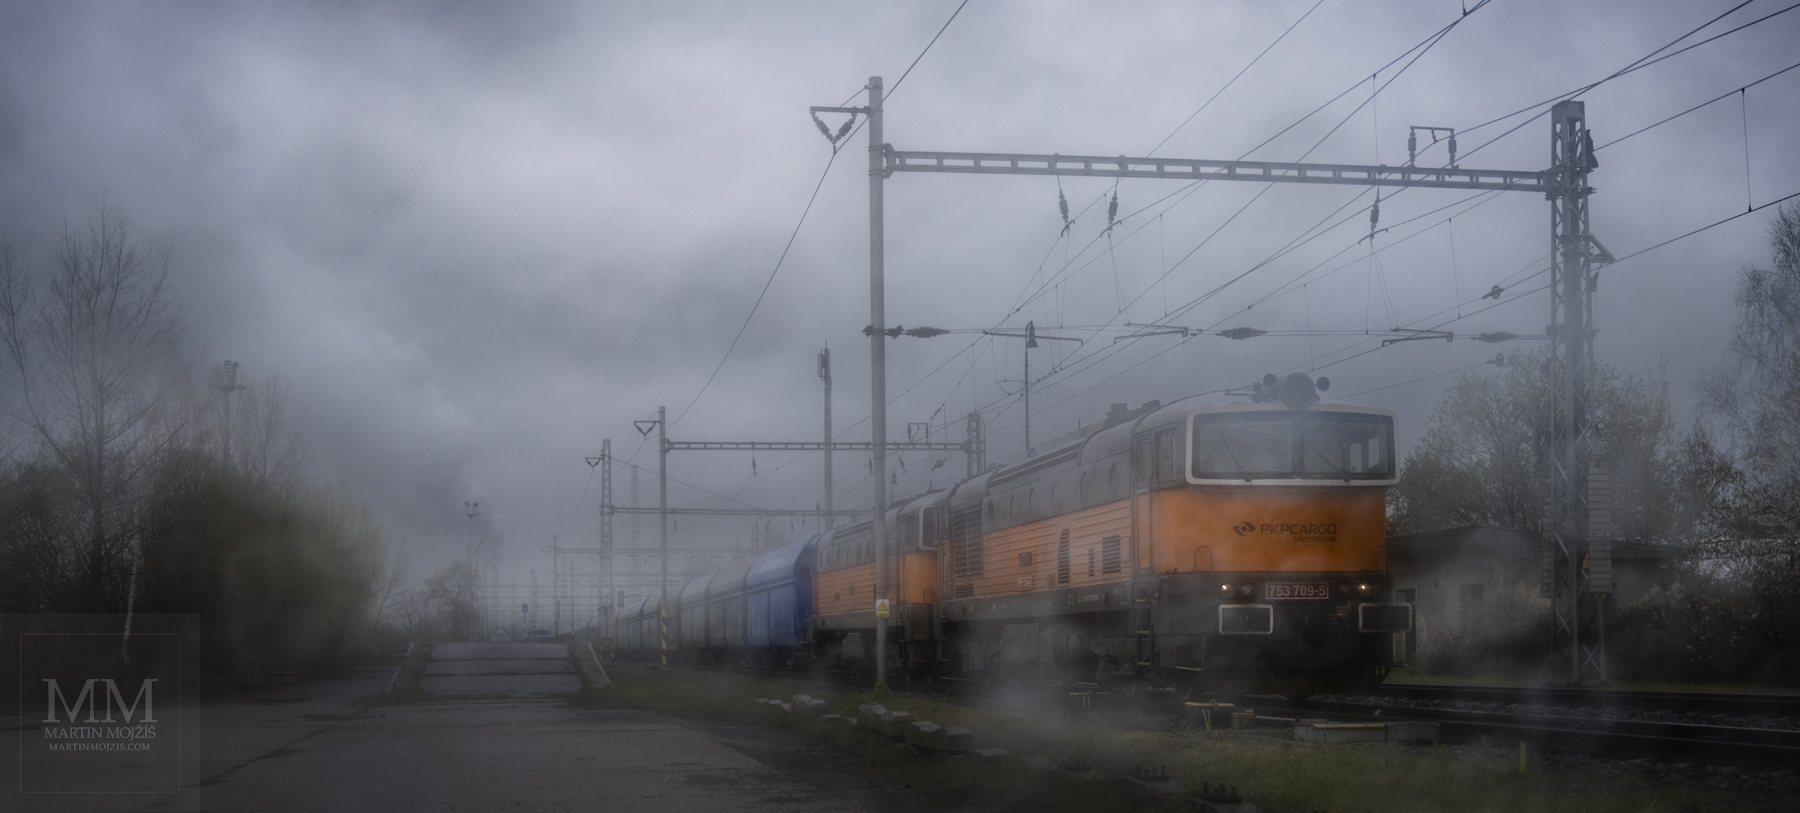 A pair of orange class 753 locomotives, led by 753 709-5, lead a coal freight train.